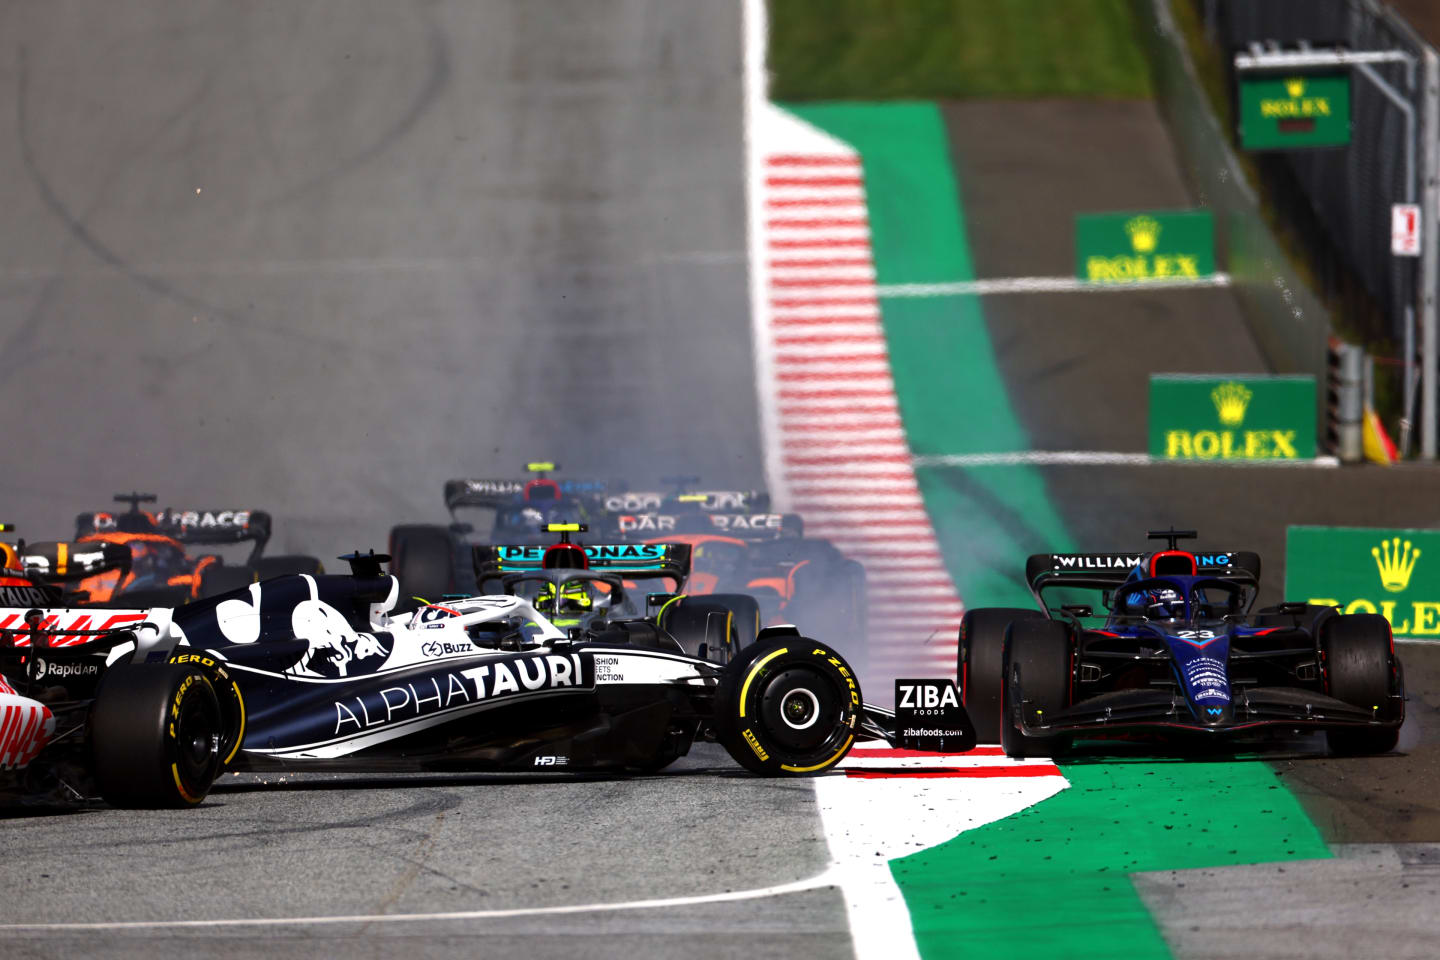 SPIELBERG, AUSTRIA - JULY 09: Pierre Gasly of France driving the (10) Scuderia AlphaTauri AT03 spins at the start during the F1 Grand Prix of Austria Sprint at Red Bull Ring on July 09, 2022 in Spielberg, Austria. (Photo by Bryn Lennon/Getty Images)